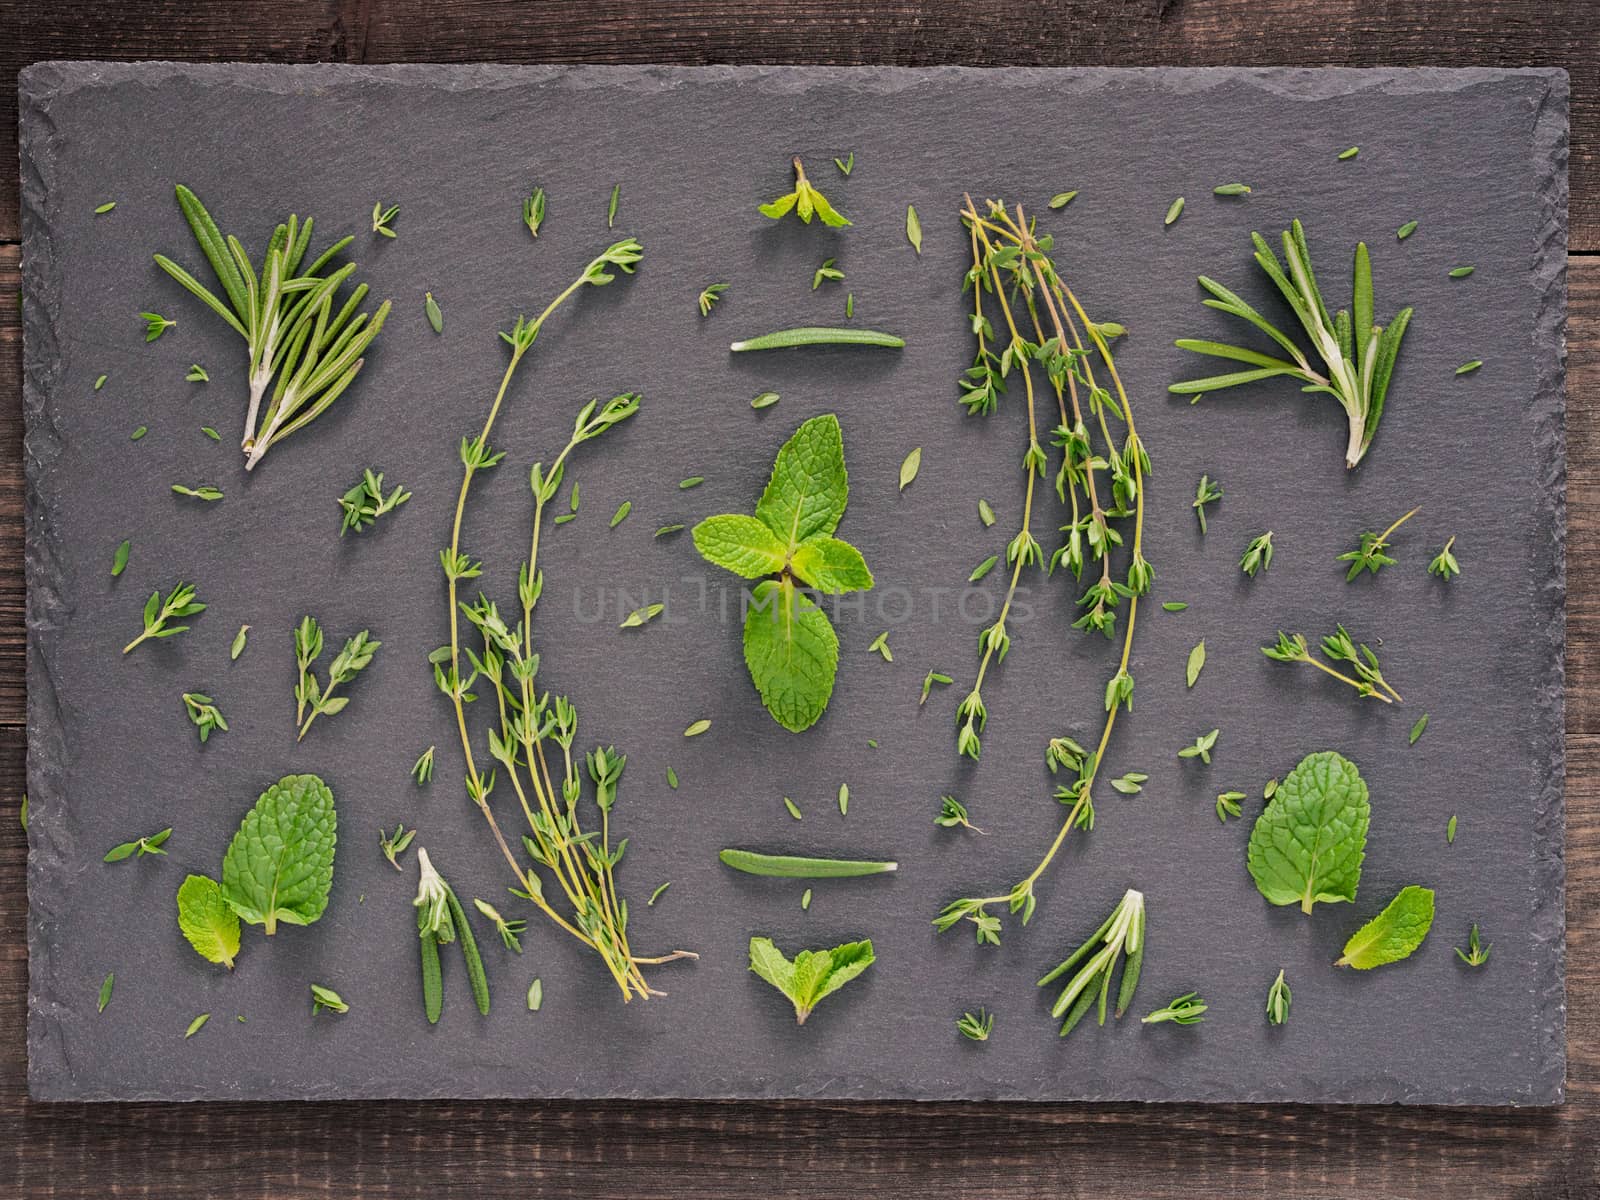 Fresh raw green herbs leaf - mint, rosemary, thyme - over gray stone background. Flat lay or top view